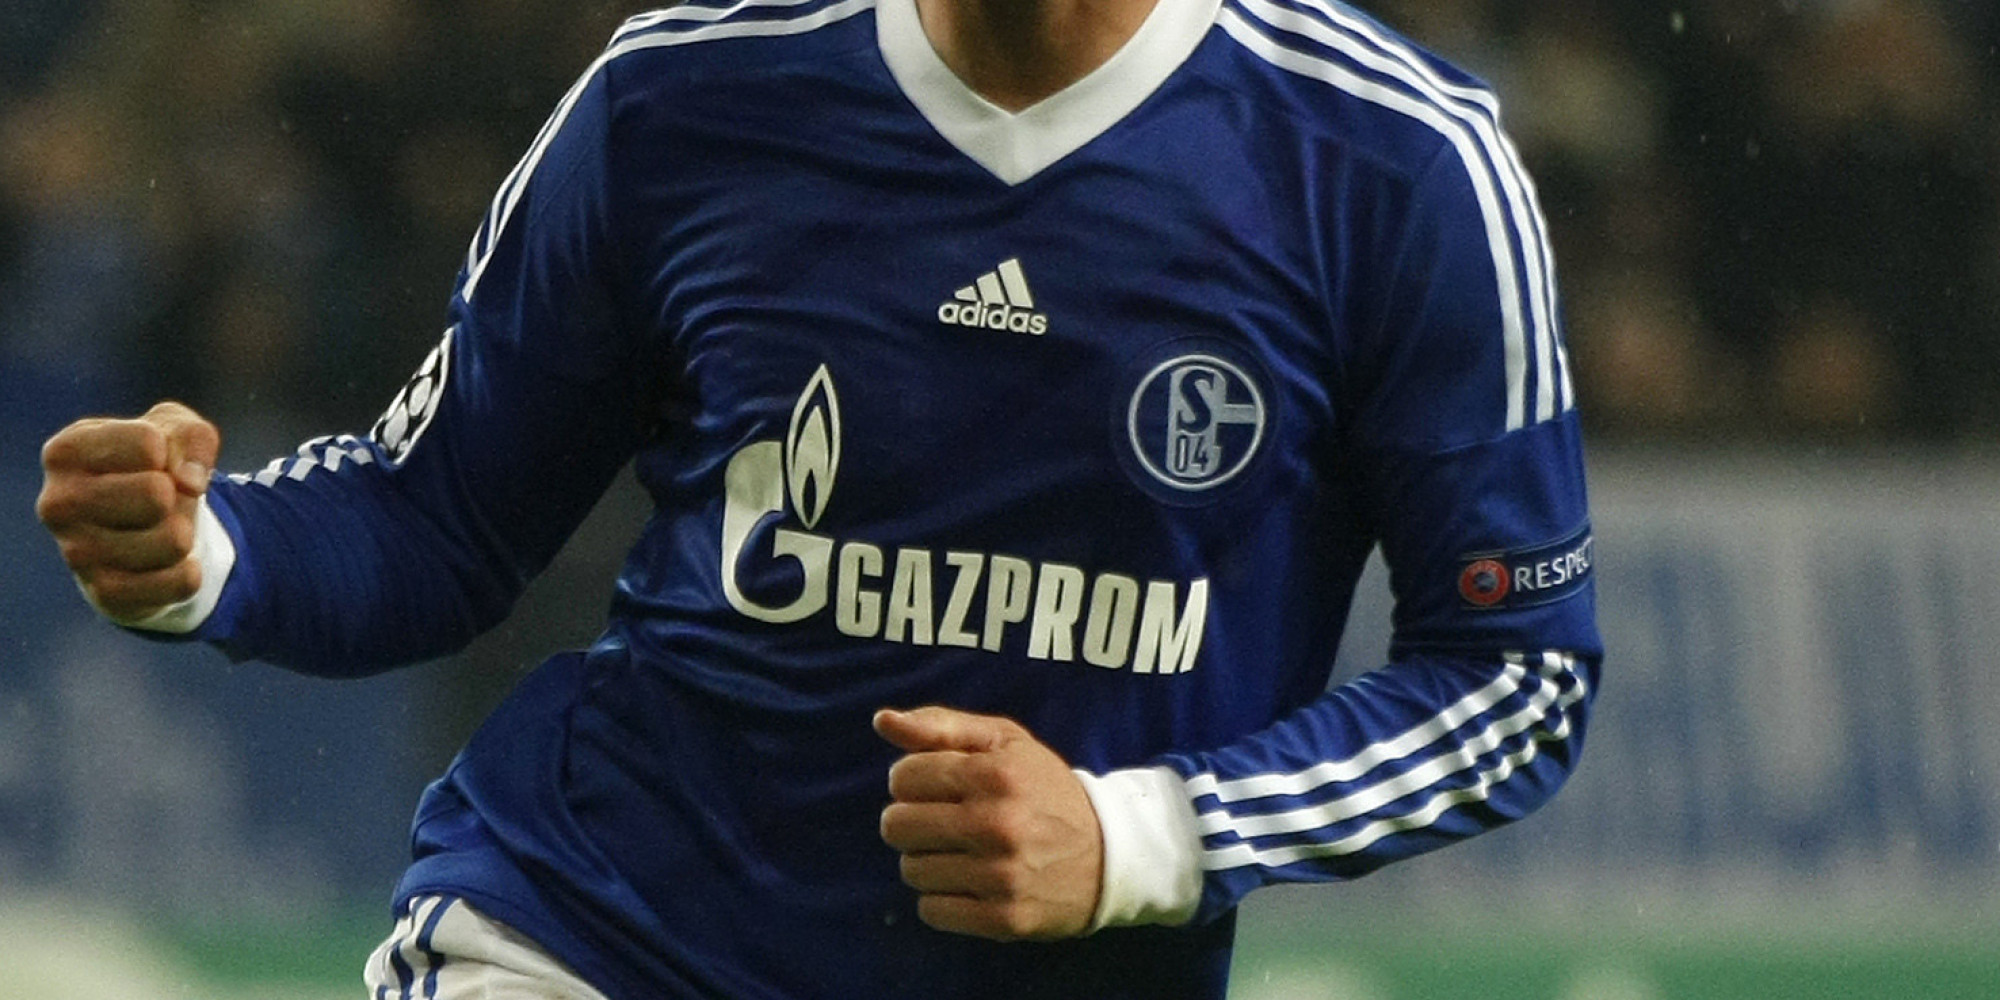 Gazprom and Schalke 04 – A New Deal on the Horizon?